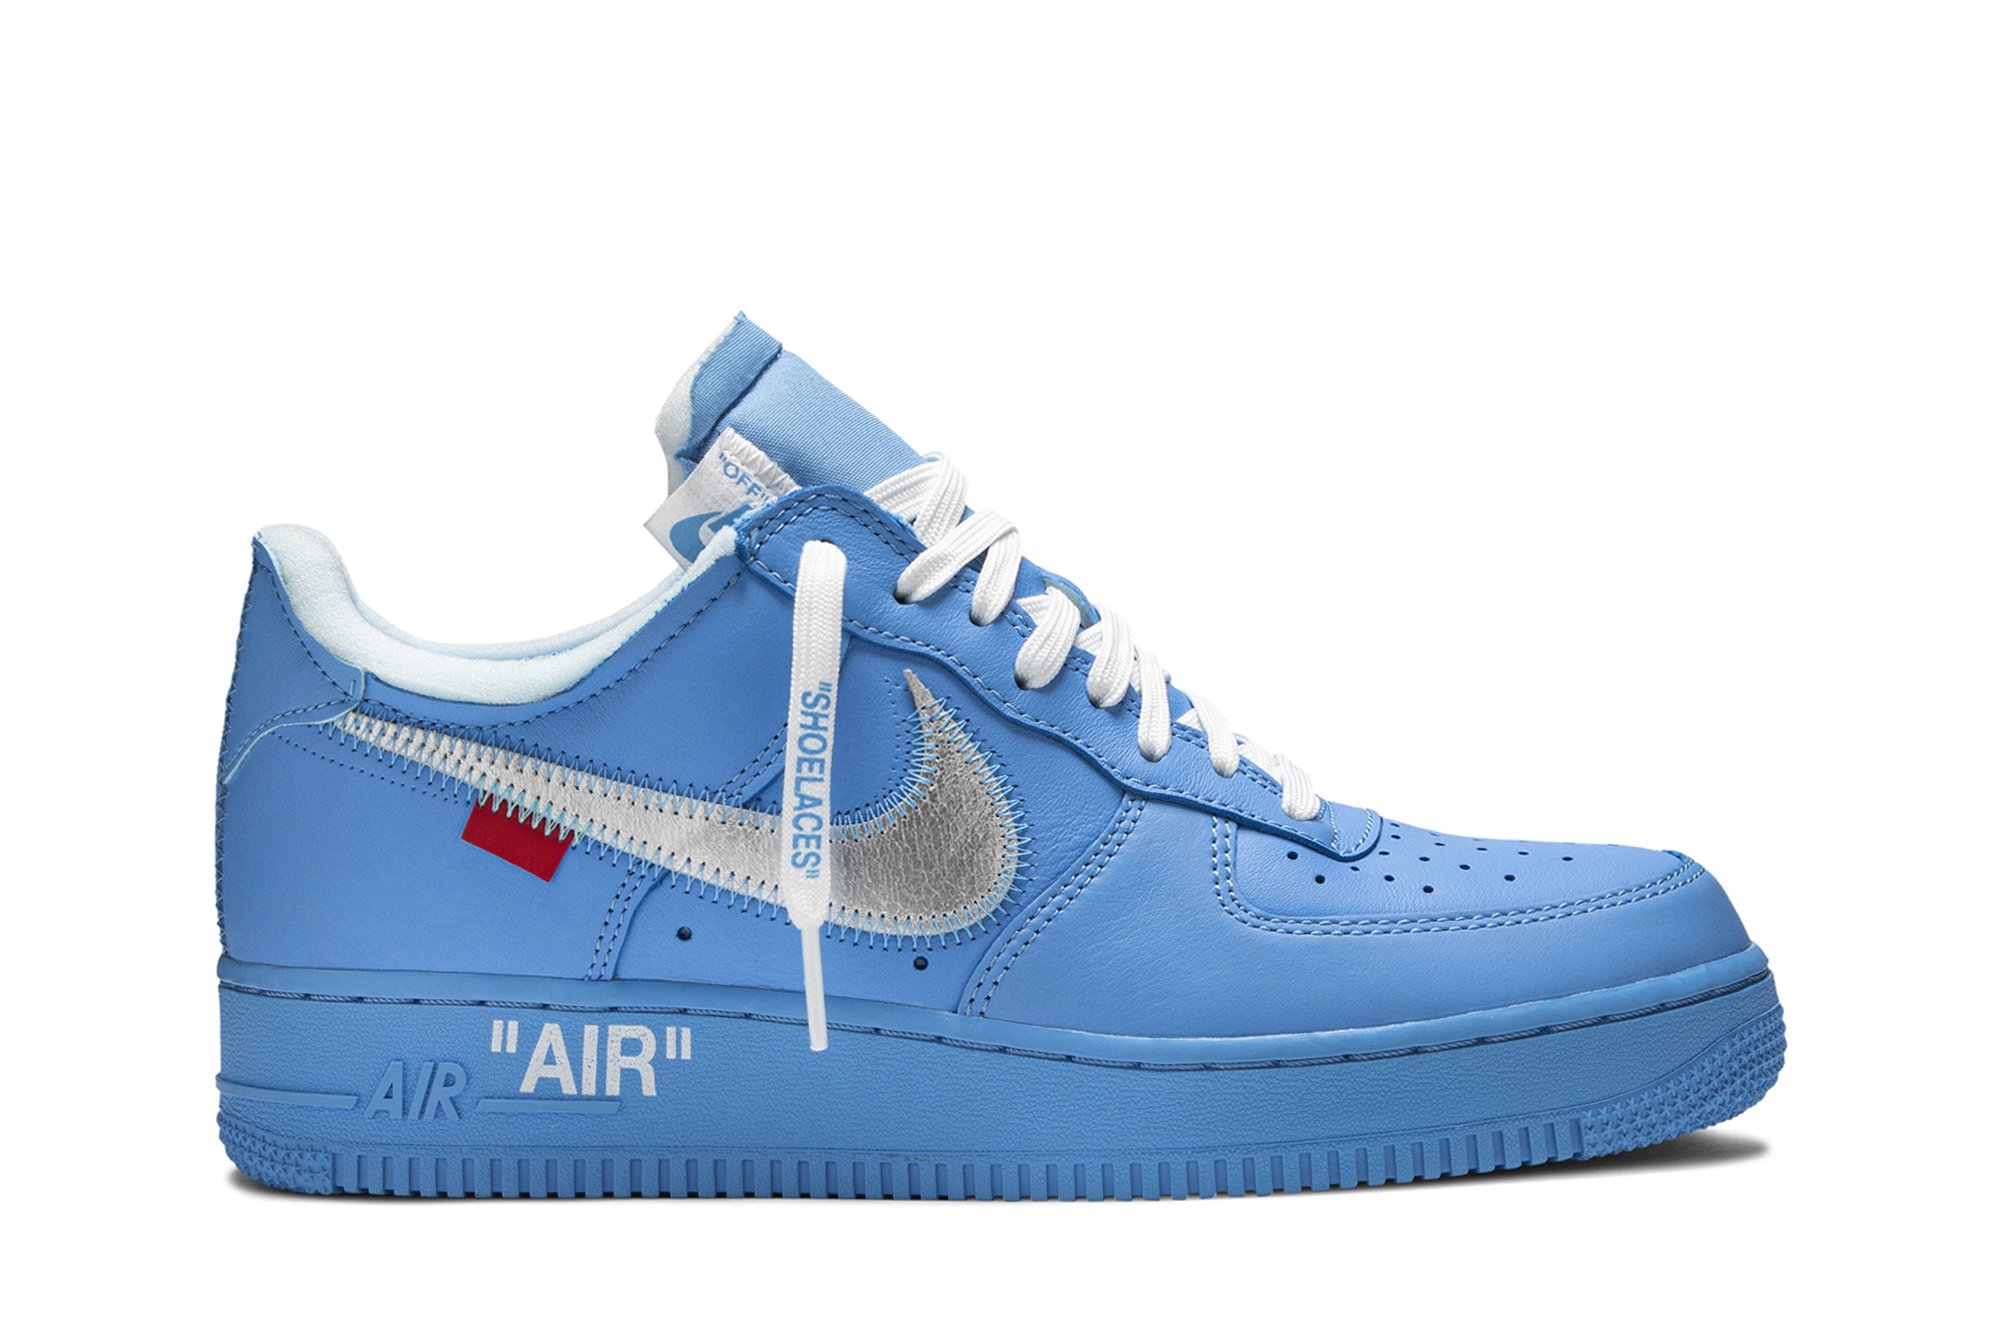 nike air force 1 space players af1 スニーカー 靴 メンズ 爆買い！